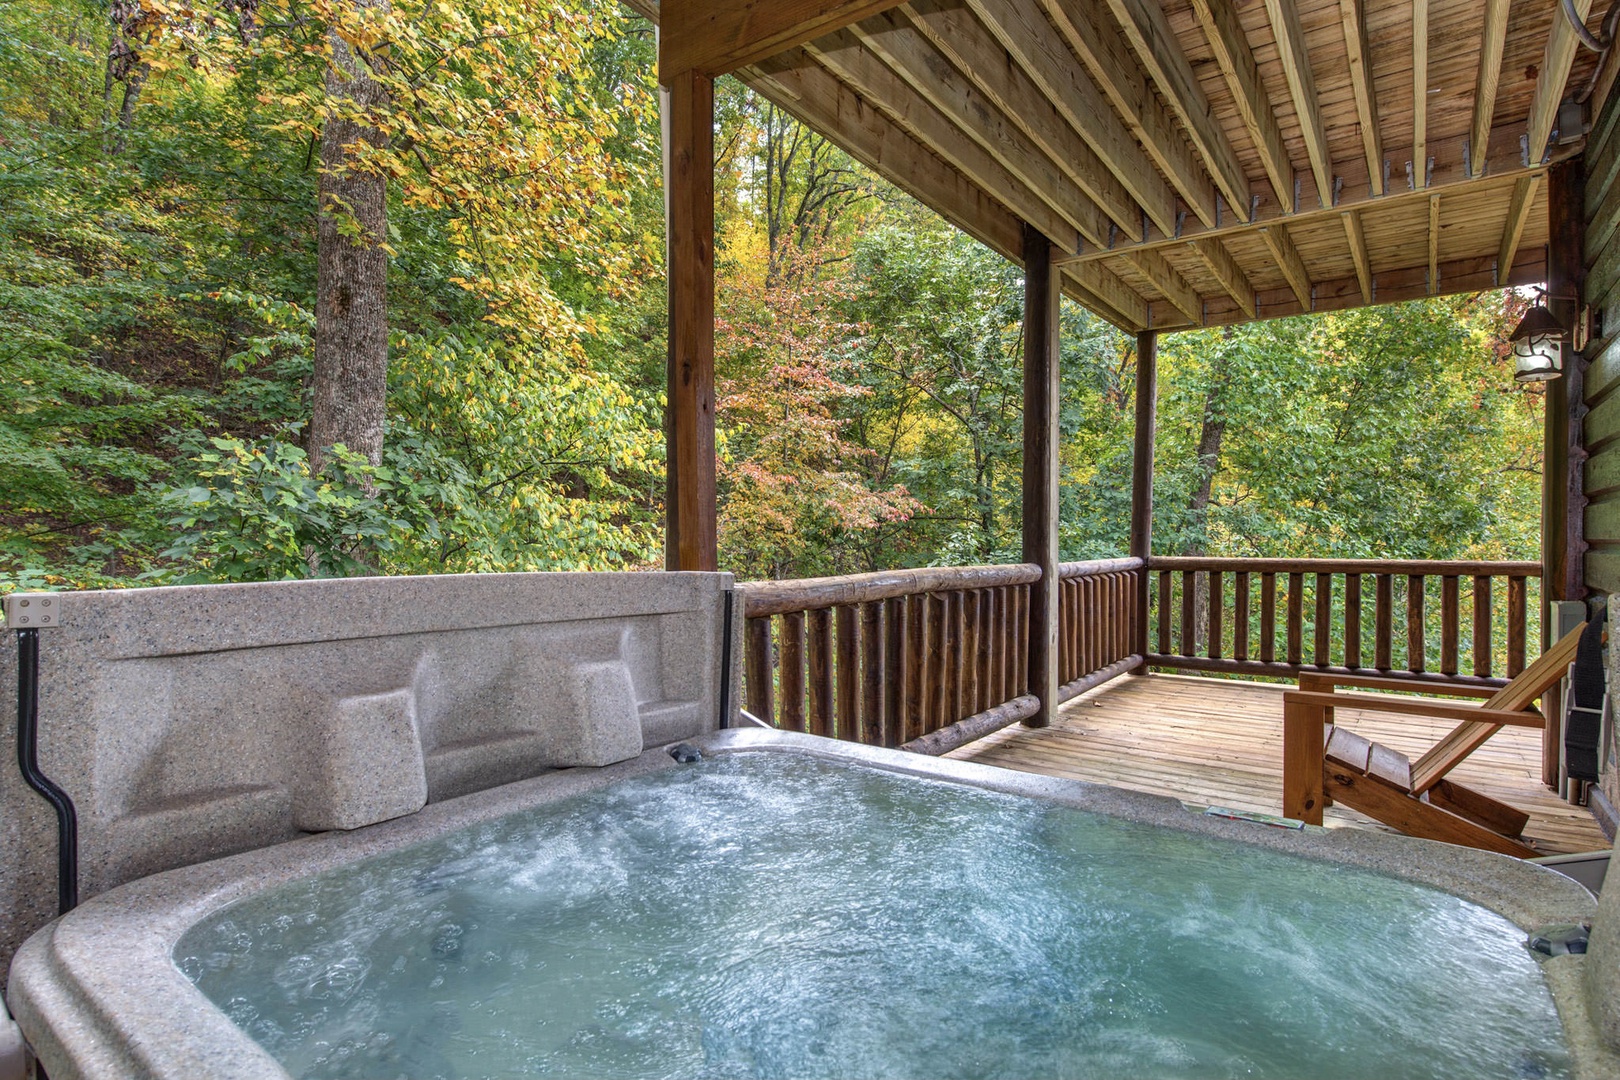 Sit back and relax in one of the 2 private hot tubs